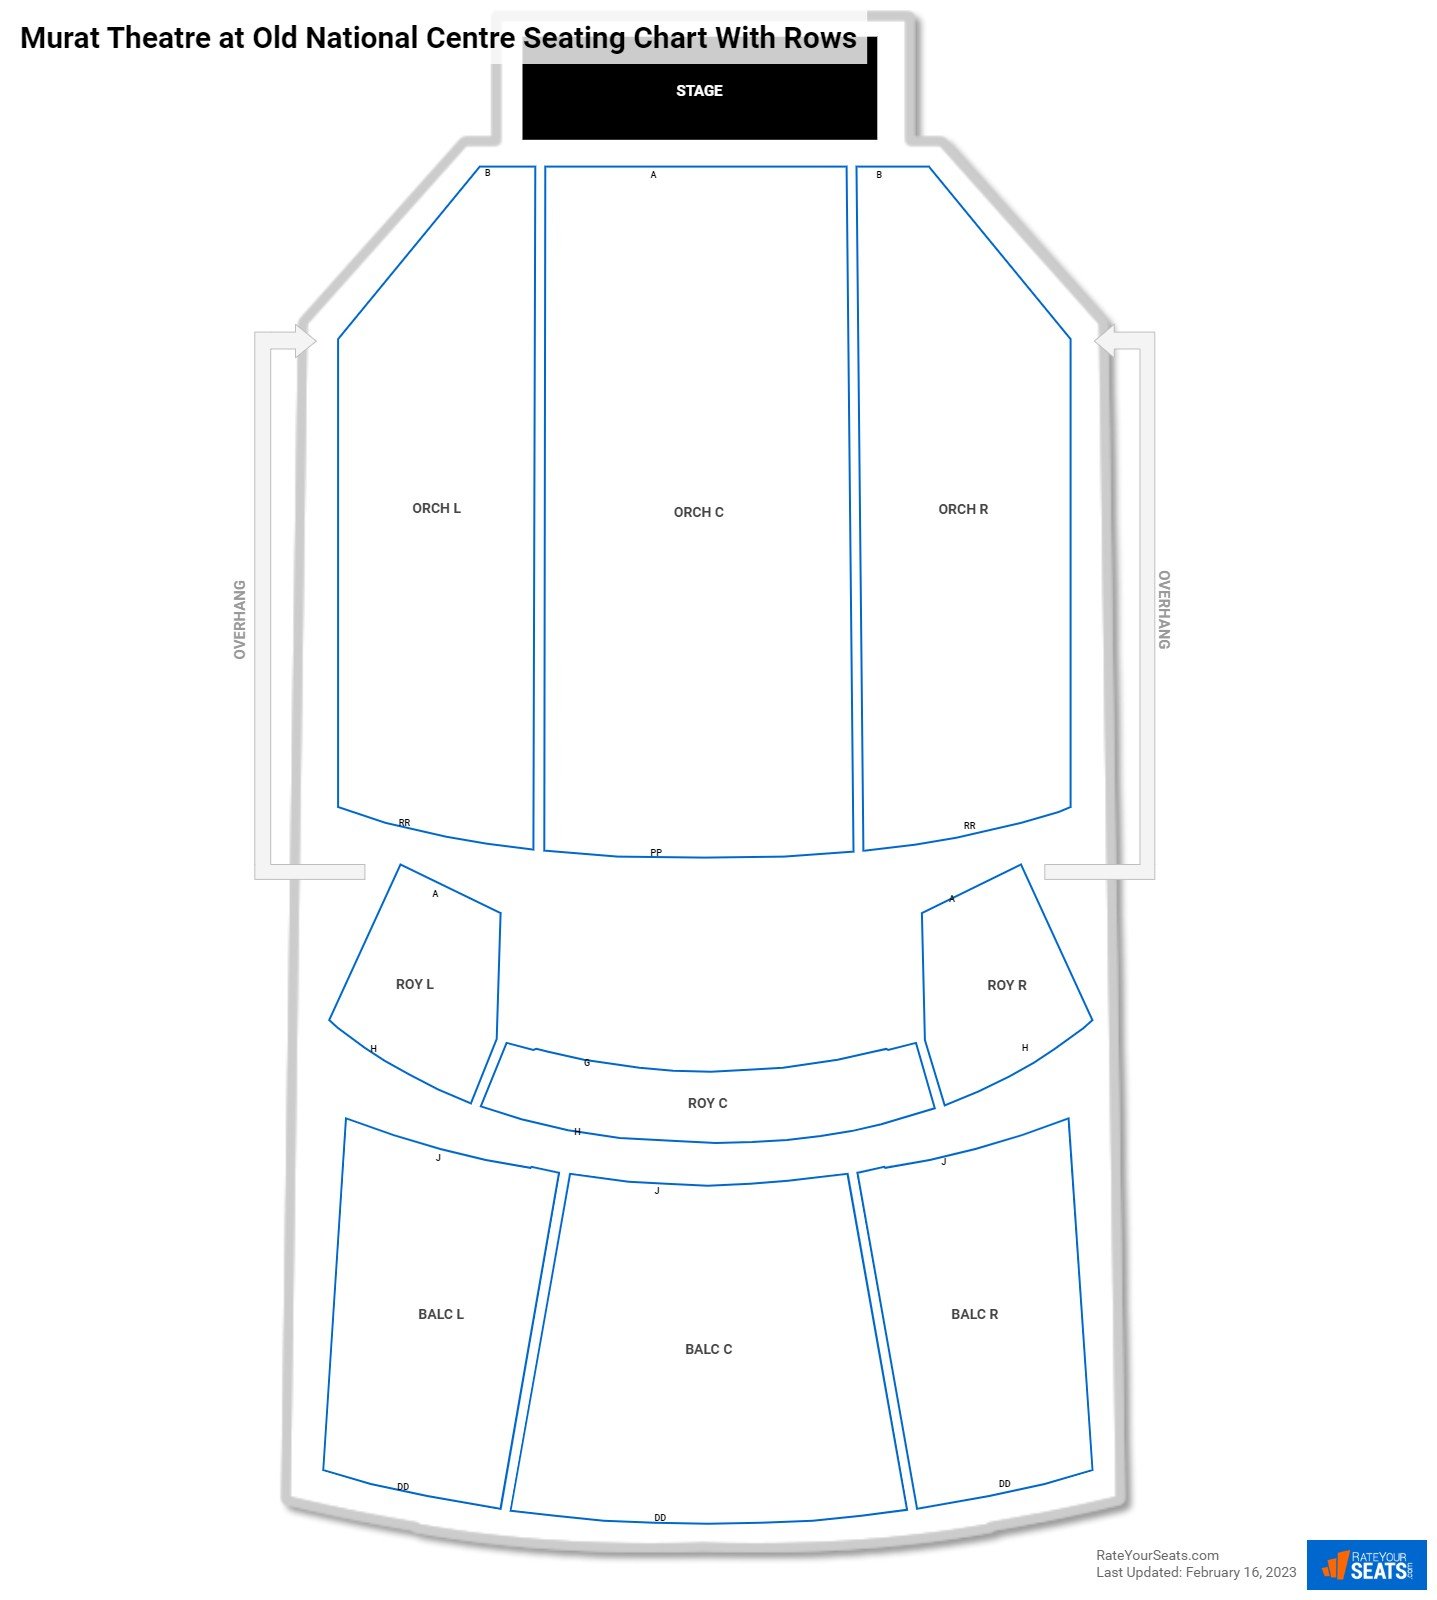 Murat Theatre at Old National Centre seating chart with row numbers